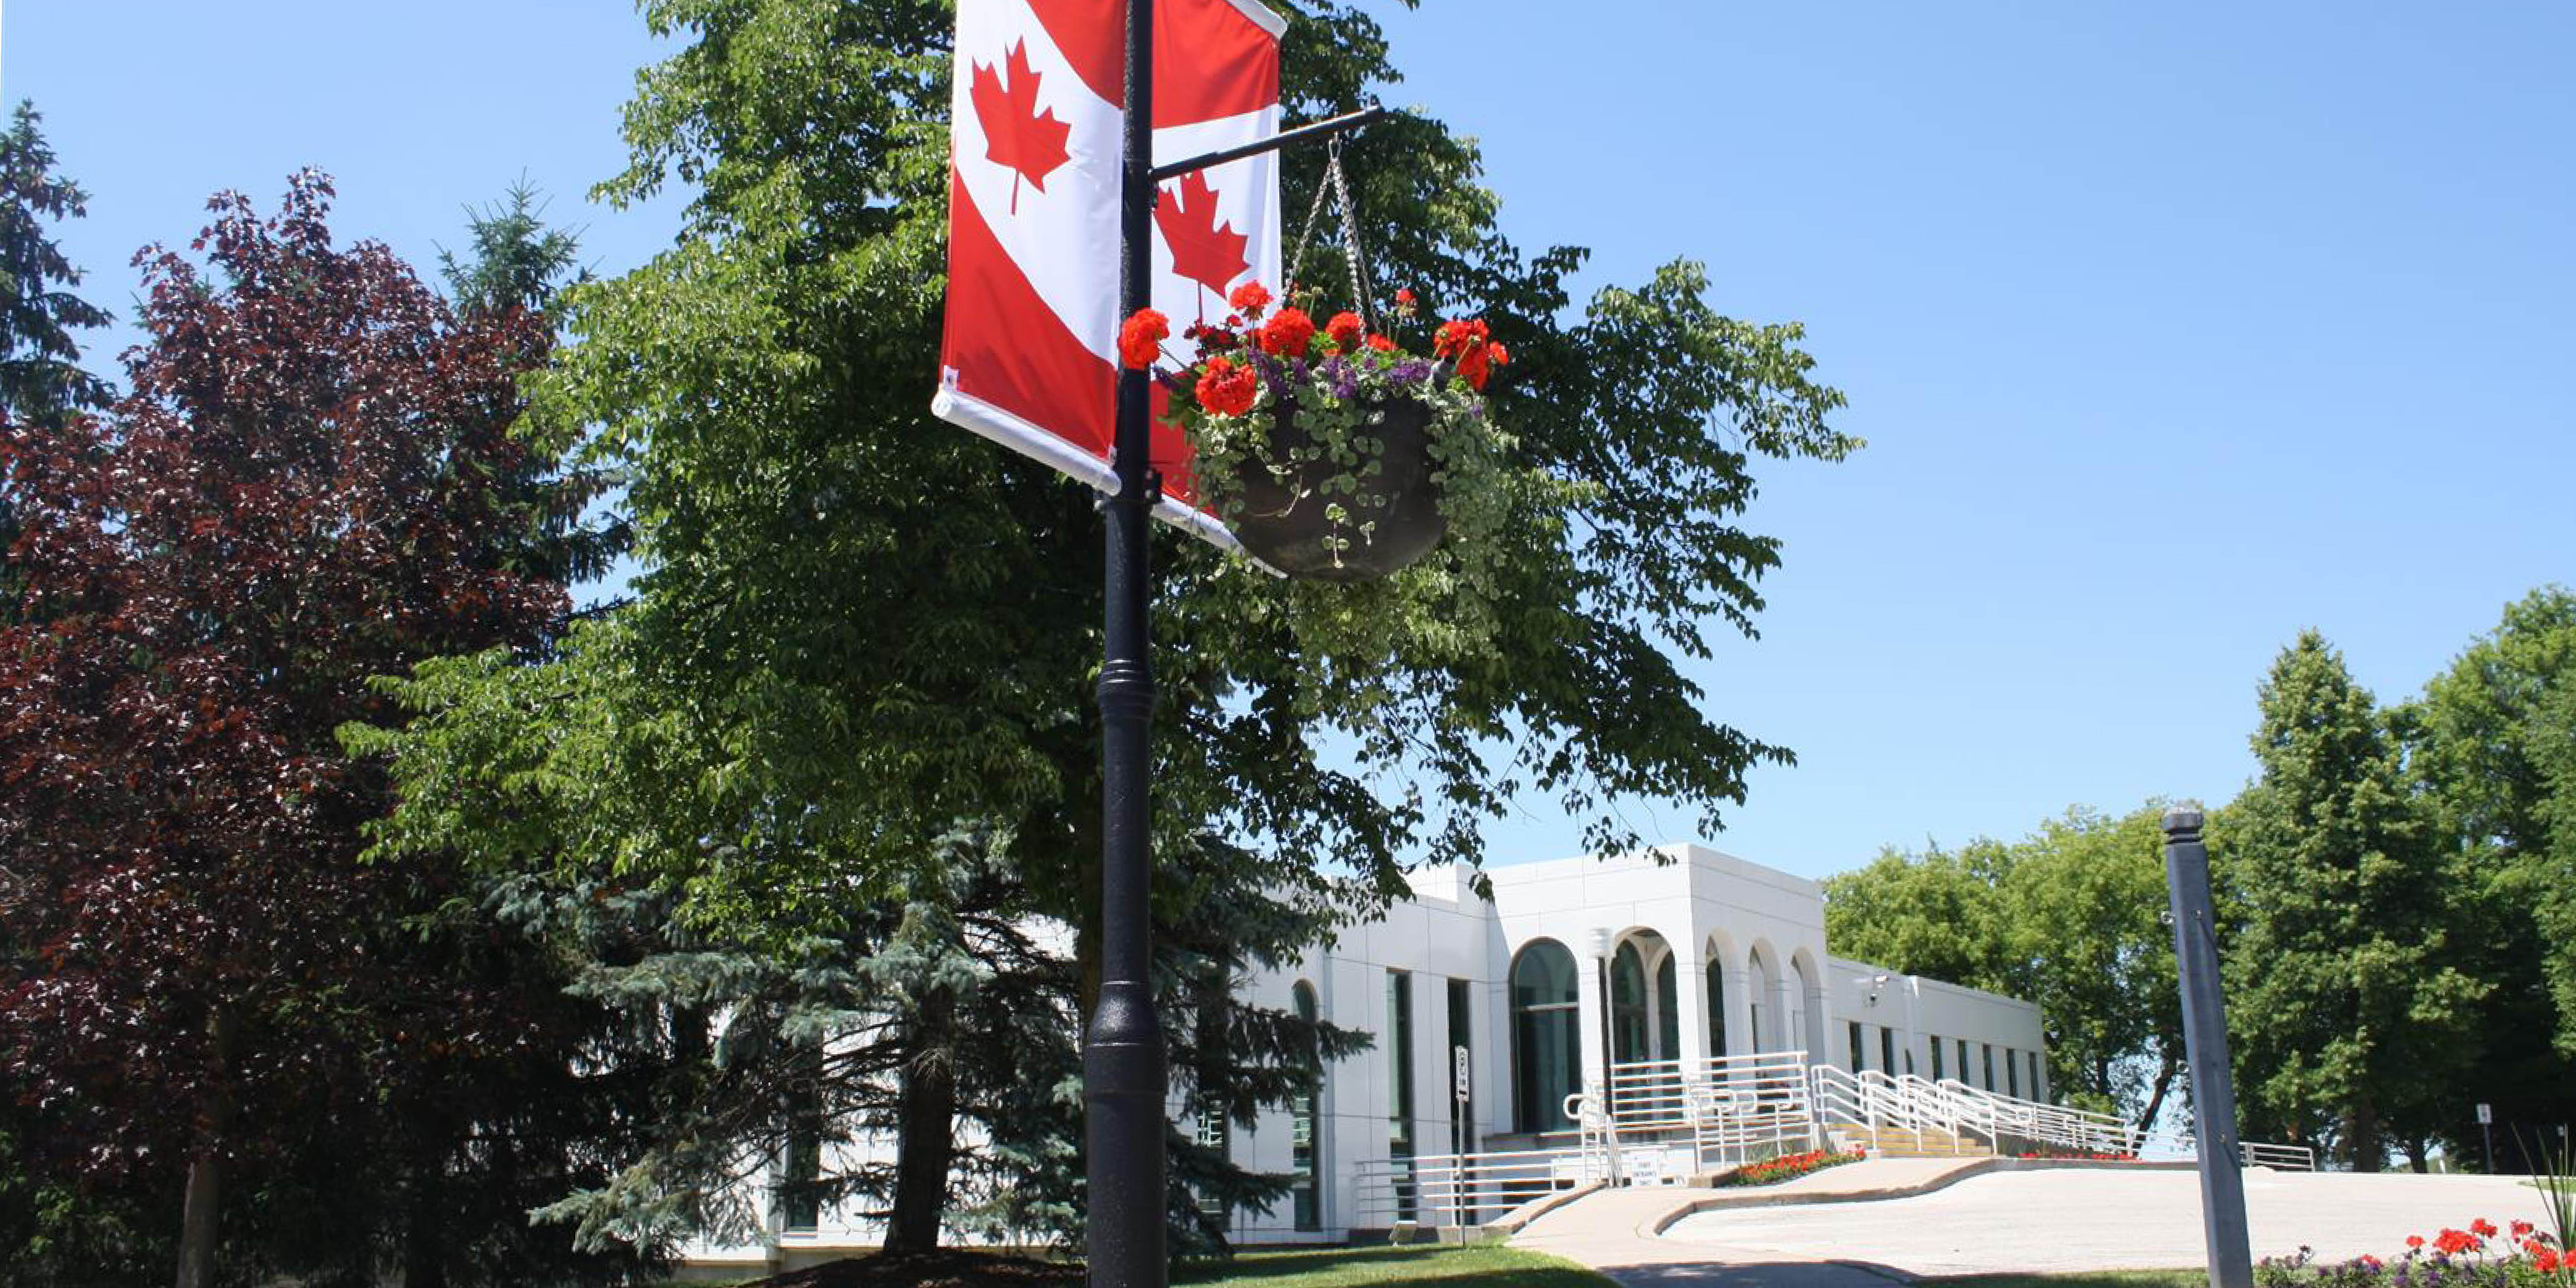 Town of East Gwillimbury Civic Centre